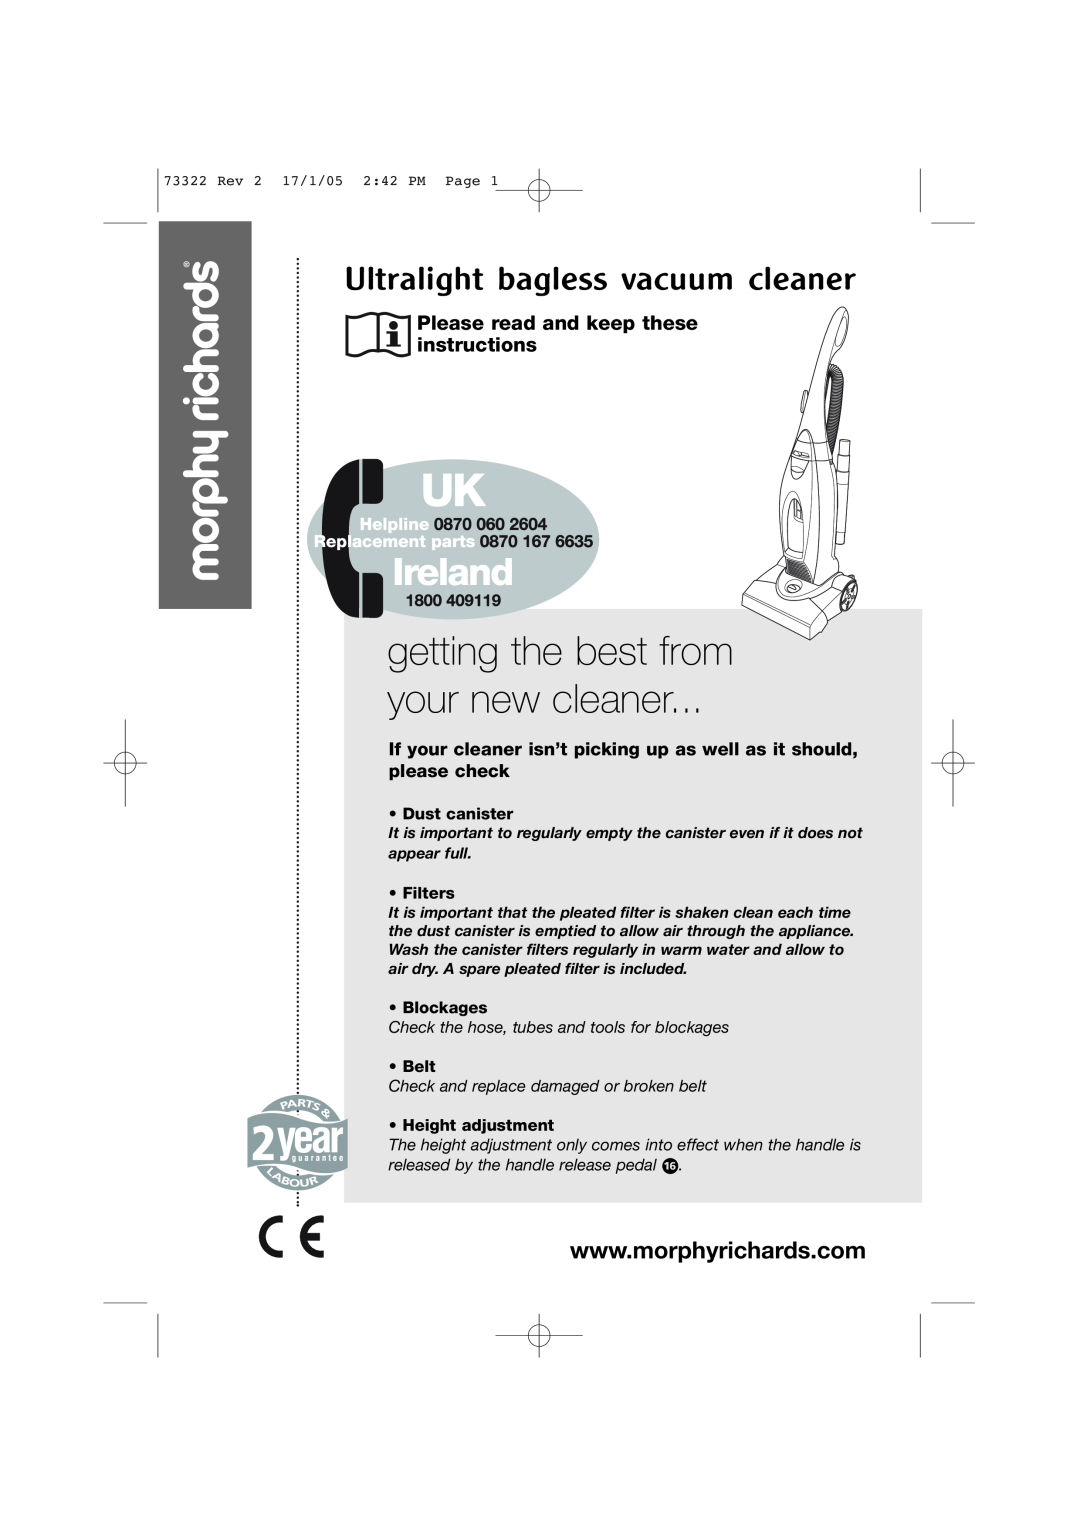 Morphy Richards Ultralight bagless vacuum cleaner manual Dust canister, Filters, Blockages, Belt, Height adjustment 